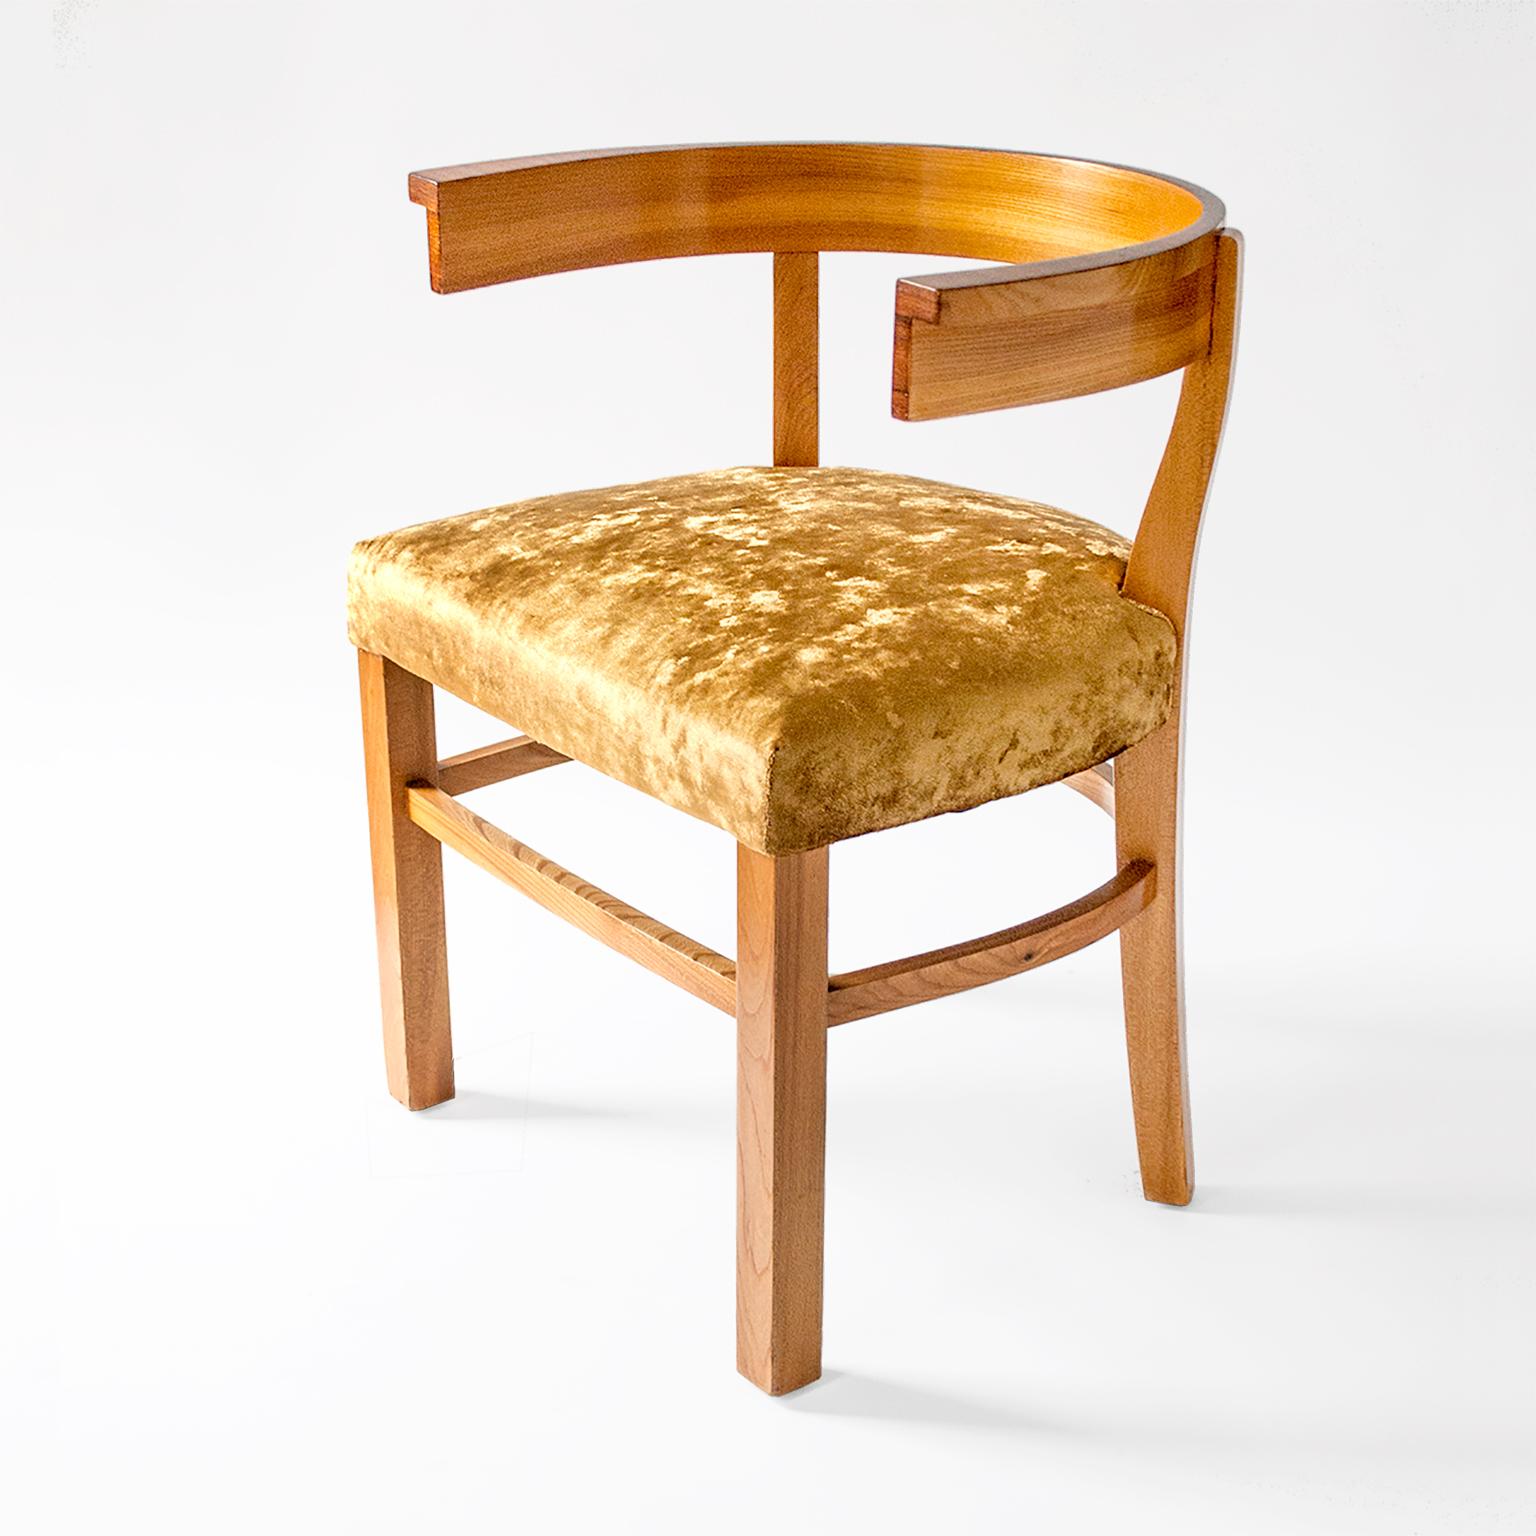 Fine Swedish art deco chair in elm with upholstered seat. The chair features a curved 